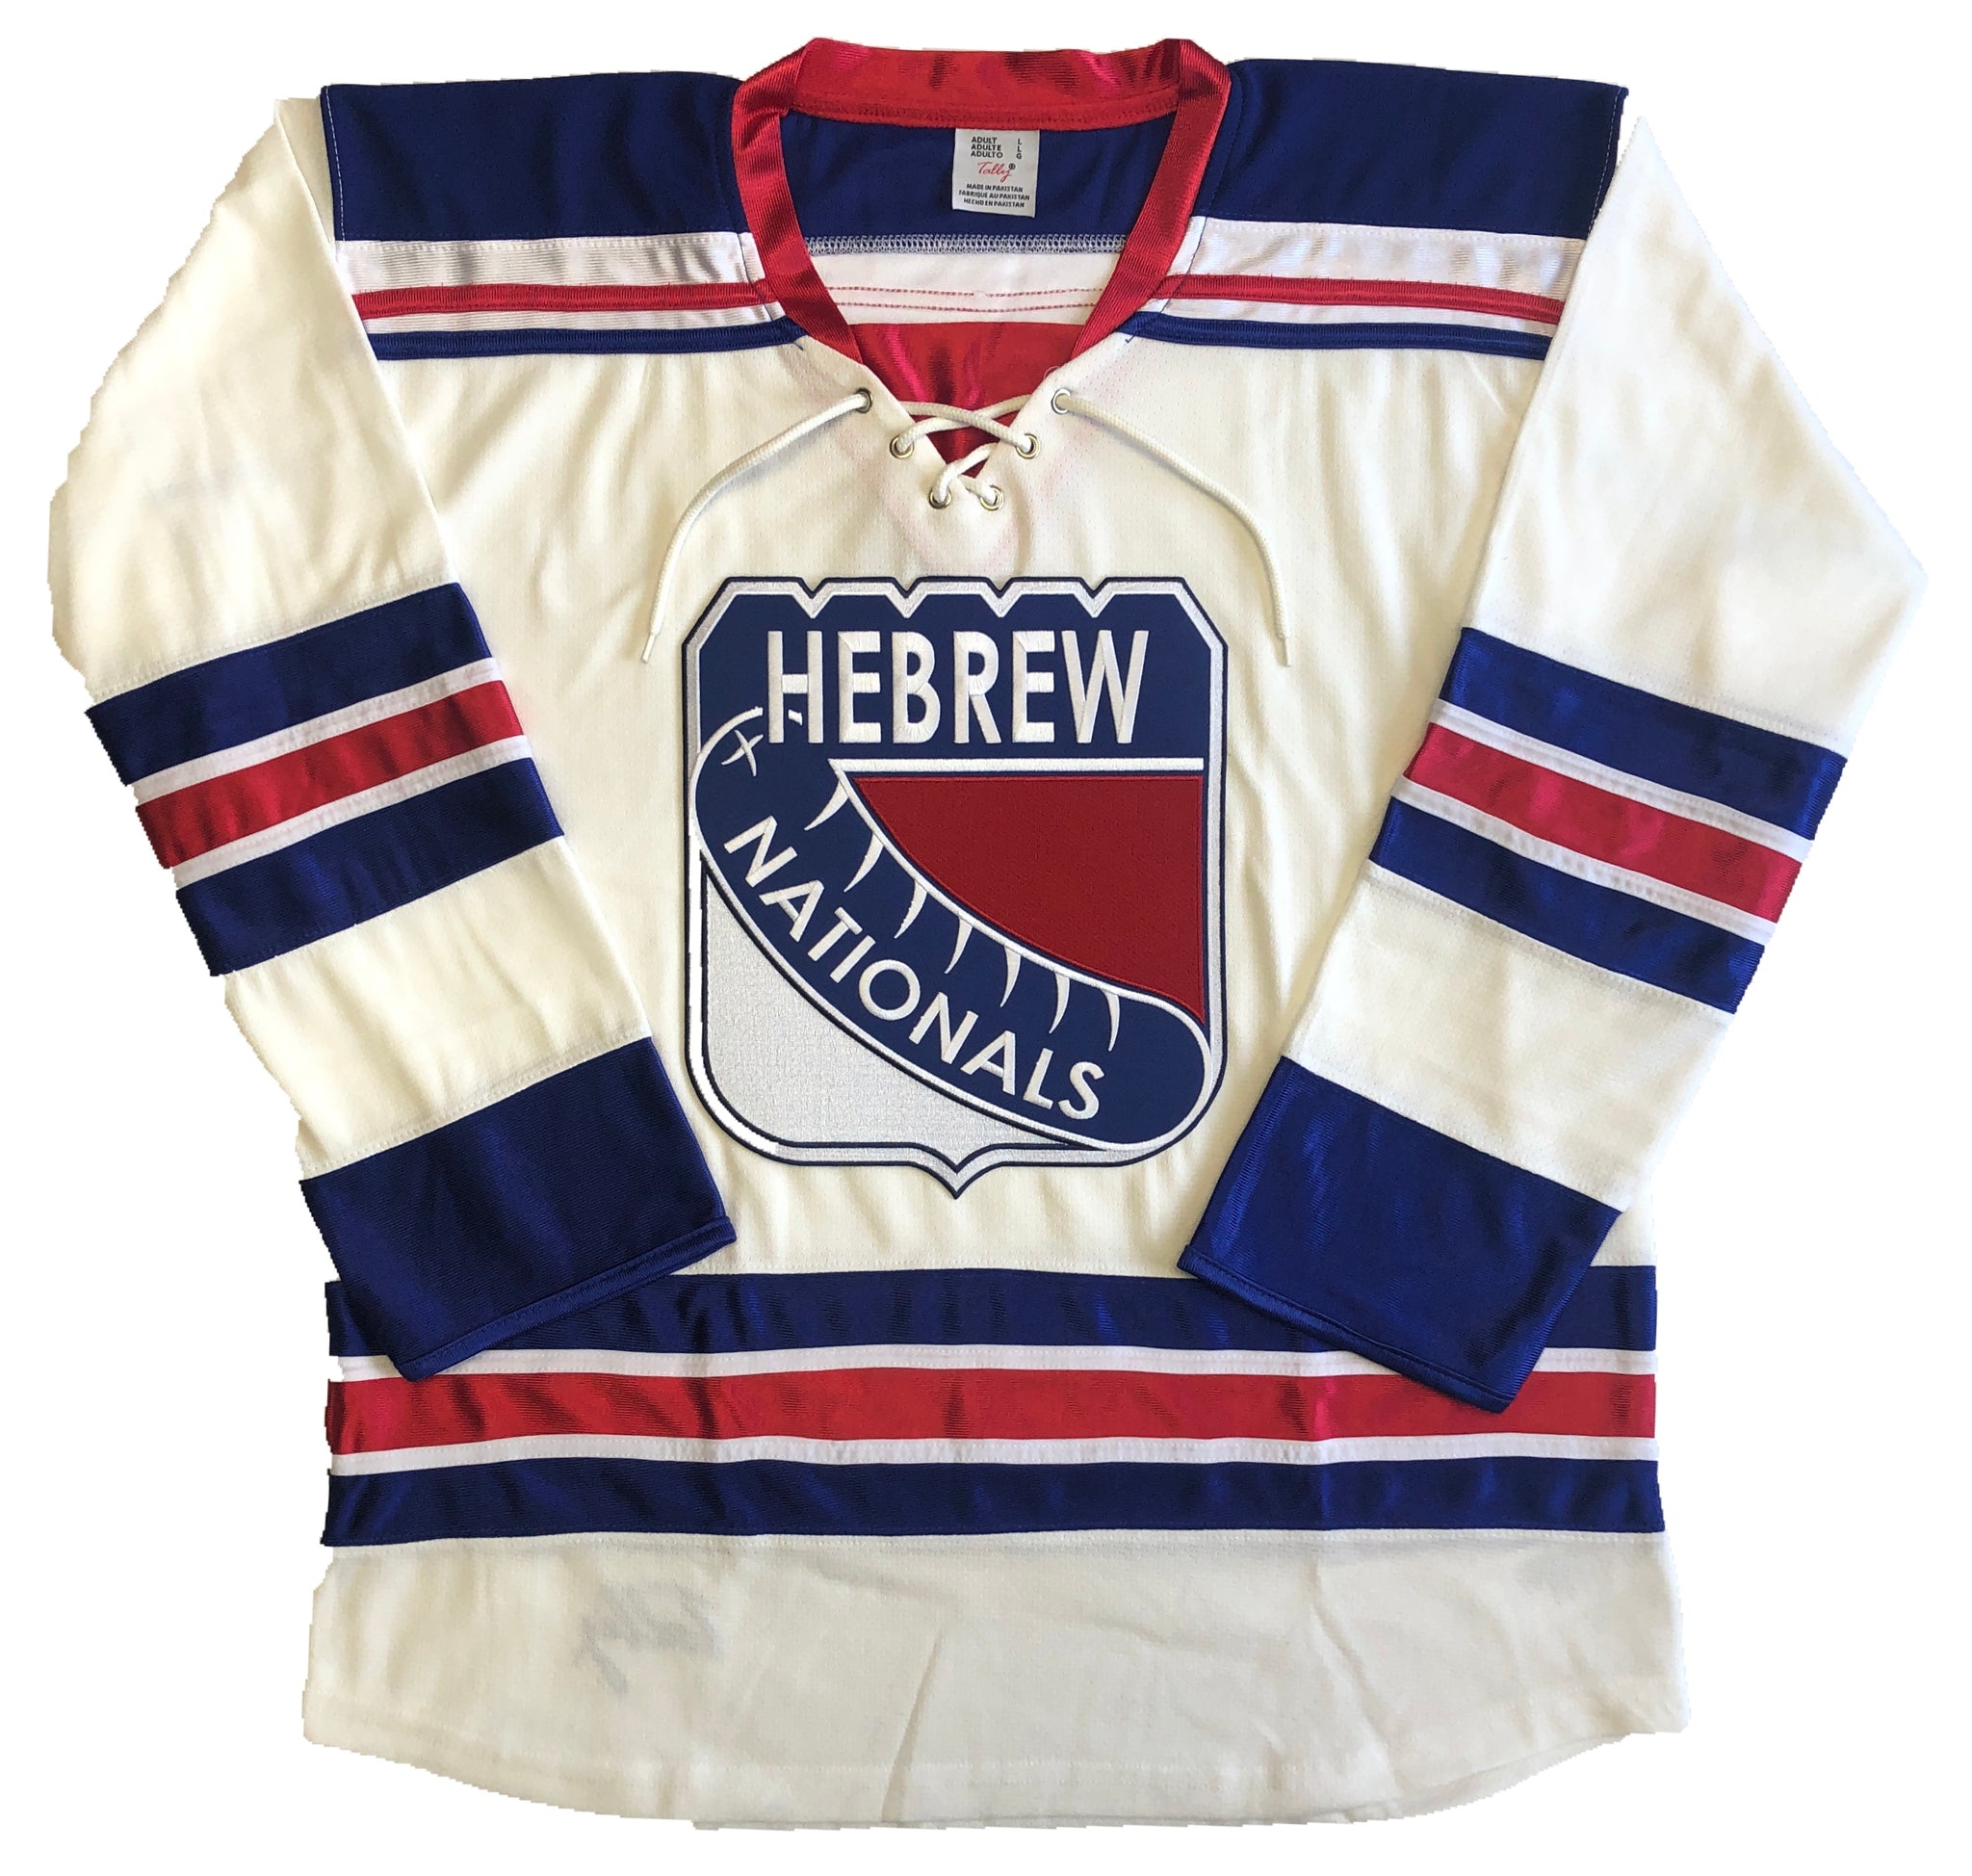 How To Customize A NHL Hockey Jersey 